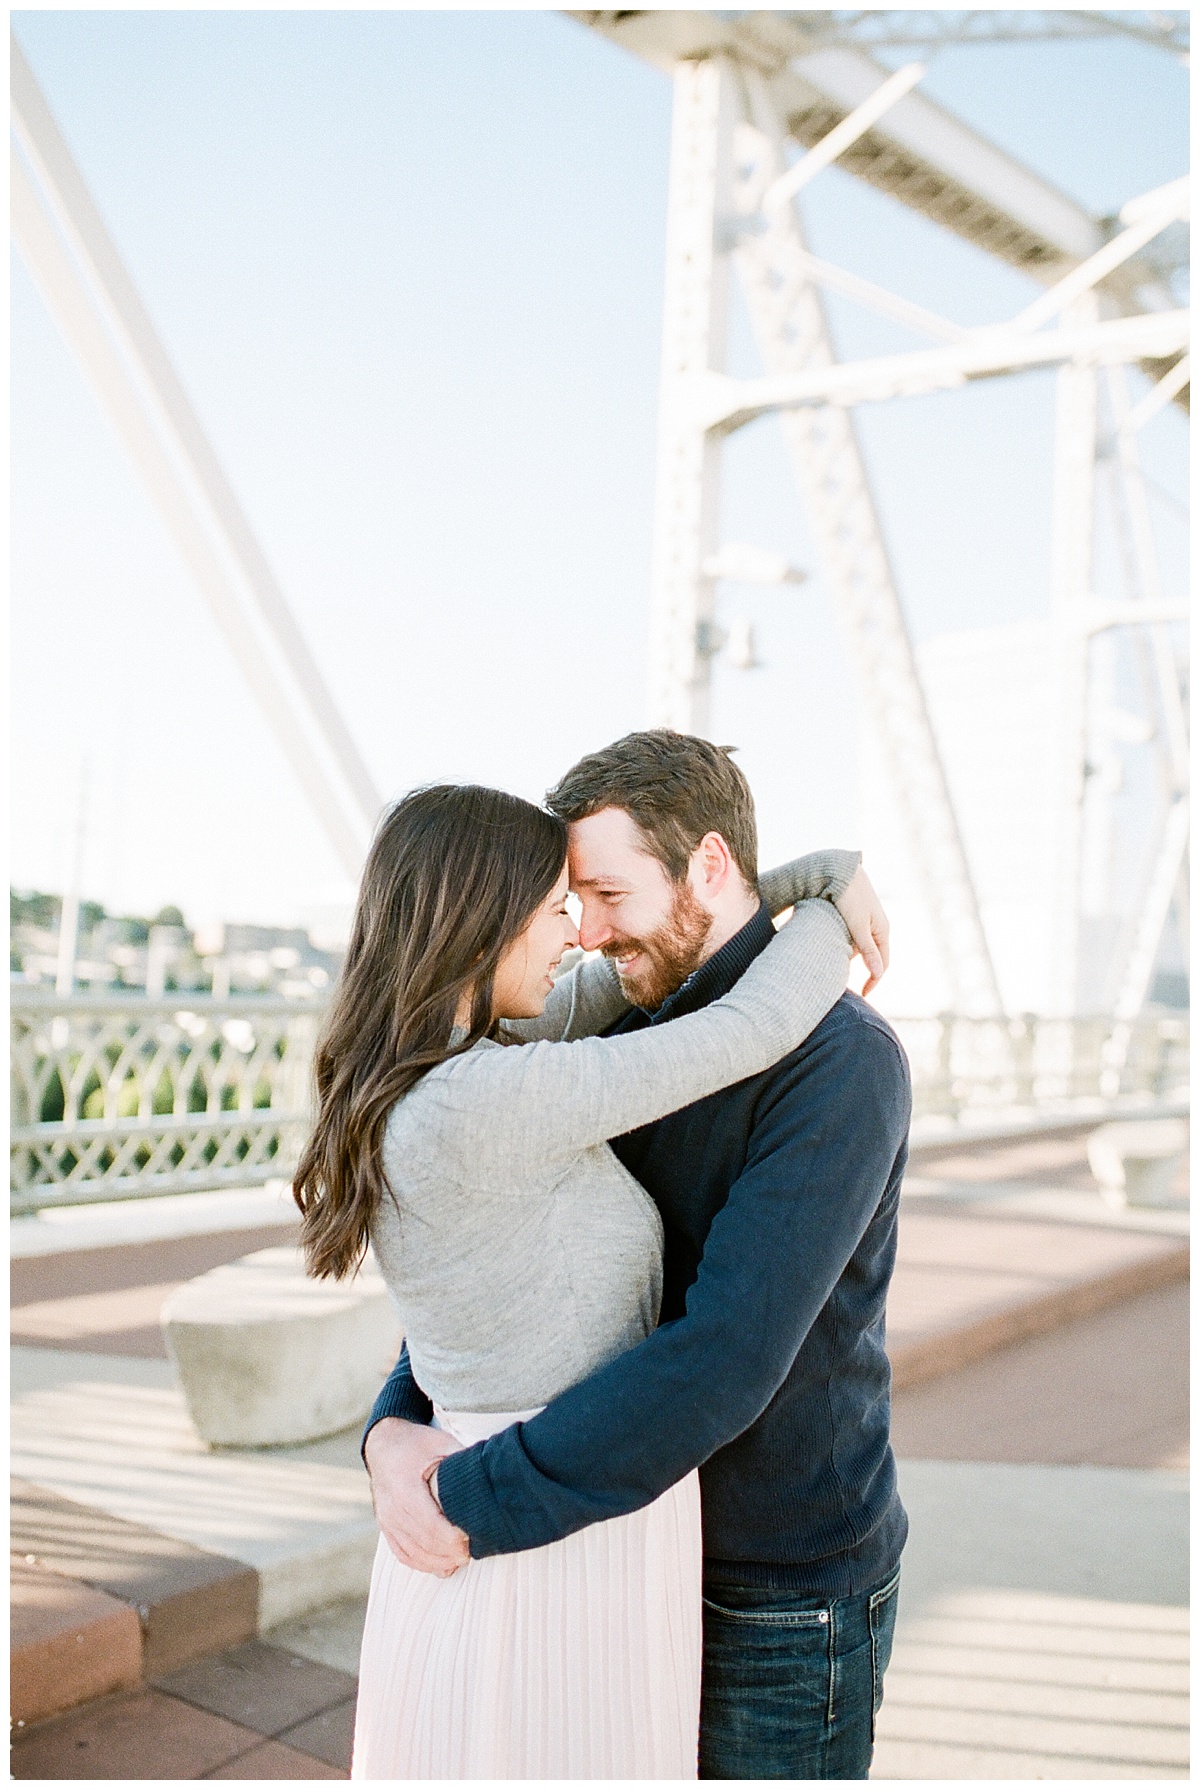 Couple enjoys their Downtown Nashville Maternity Session with Grace Paul Photography.